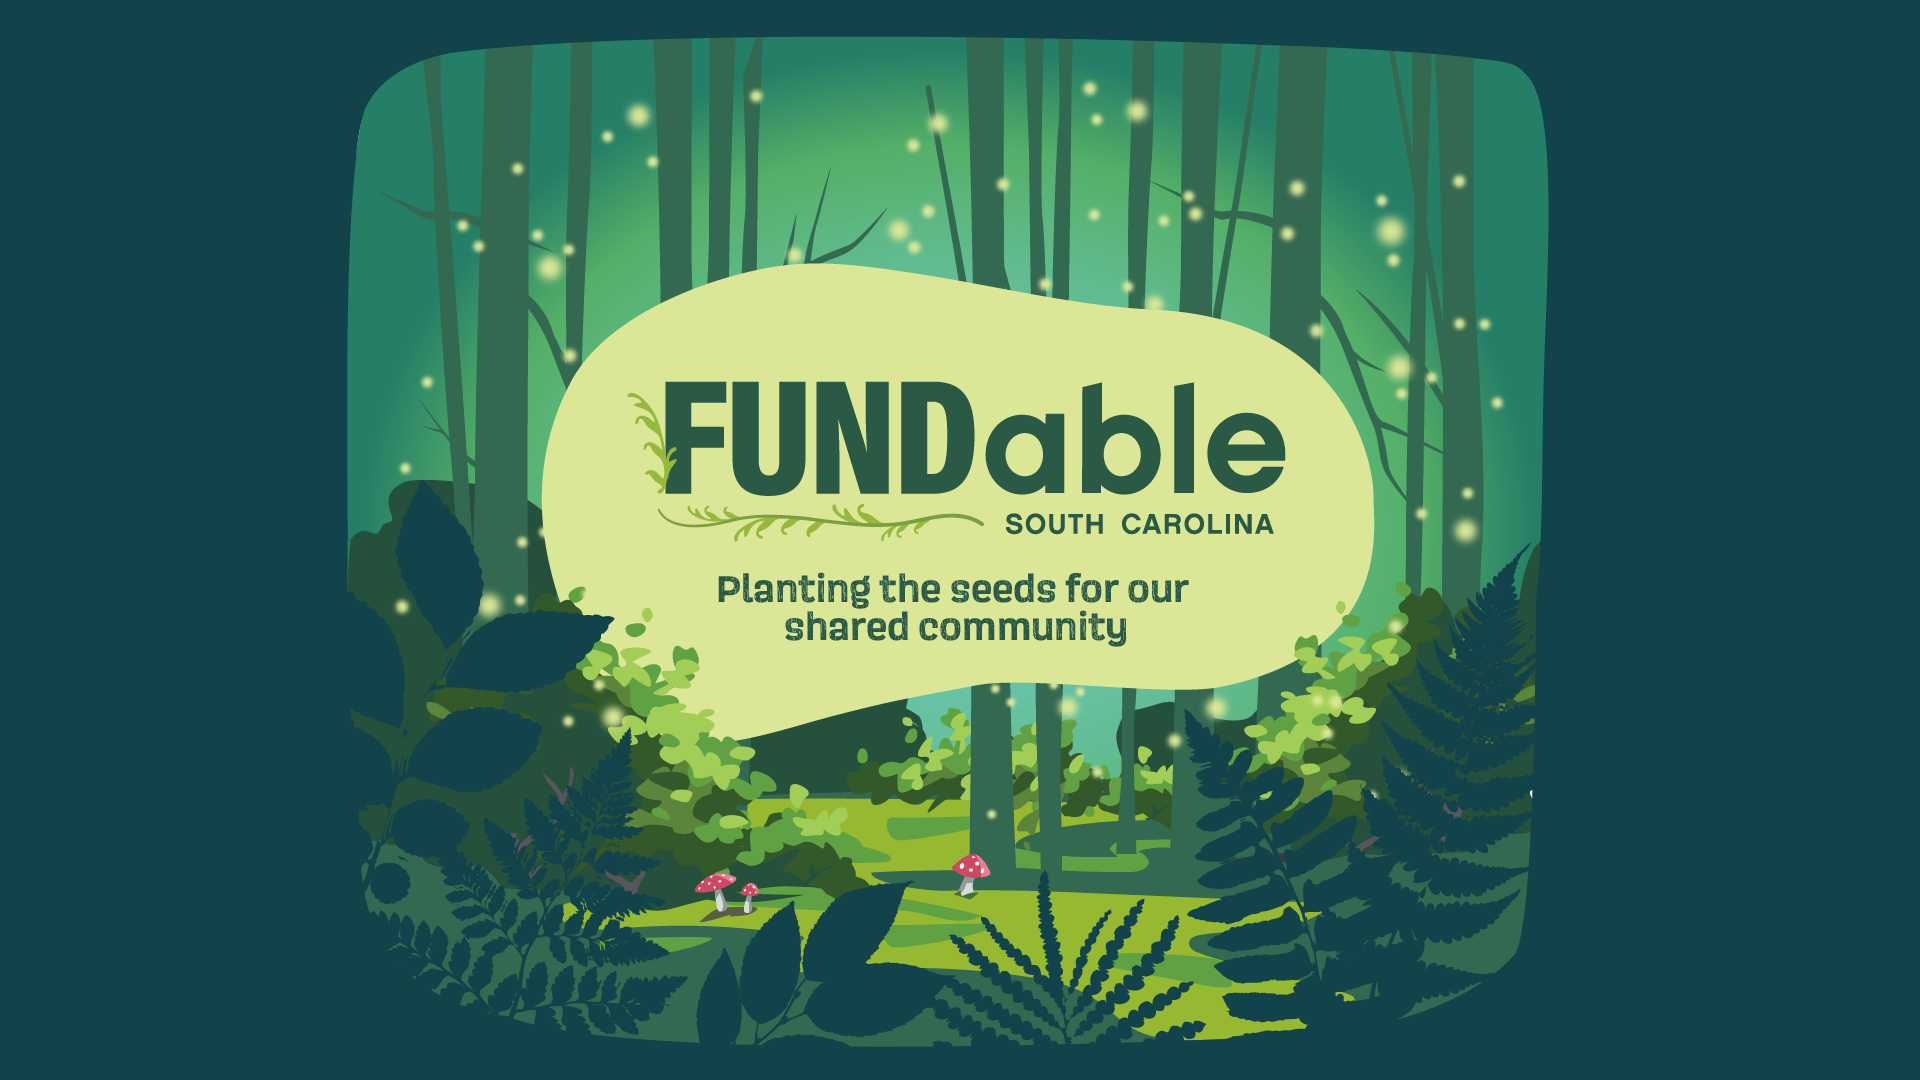 FundAble Event Artwork: As if peering through a keyhole, the foreground is surrounded by a dark teal with silhouettes of plants and ferns surrounding the central image. In the center is a small clearing within a forest of illustrated trees, moss, and bushes in varying shades of green, and three small white and red dotted toadstool mushrooms, a large organic shape in light green contains the text, 'FundAble, South Carolina, Planting the seeds for our shared community.' The text is dark green. The 'Fund' of fundable is framed with vines and leaves. The 'Able' of fundable mimics the Able South Carolina logo. Light green-yellow dots that appear to be emitting light fill the frame in a firefly glow effect. According to the artist, the fireflies represent local connections as well as individuals, all synchronizing and coming together for a cause.